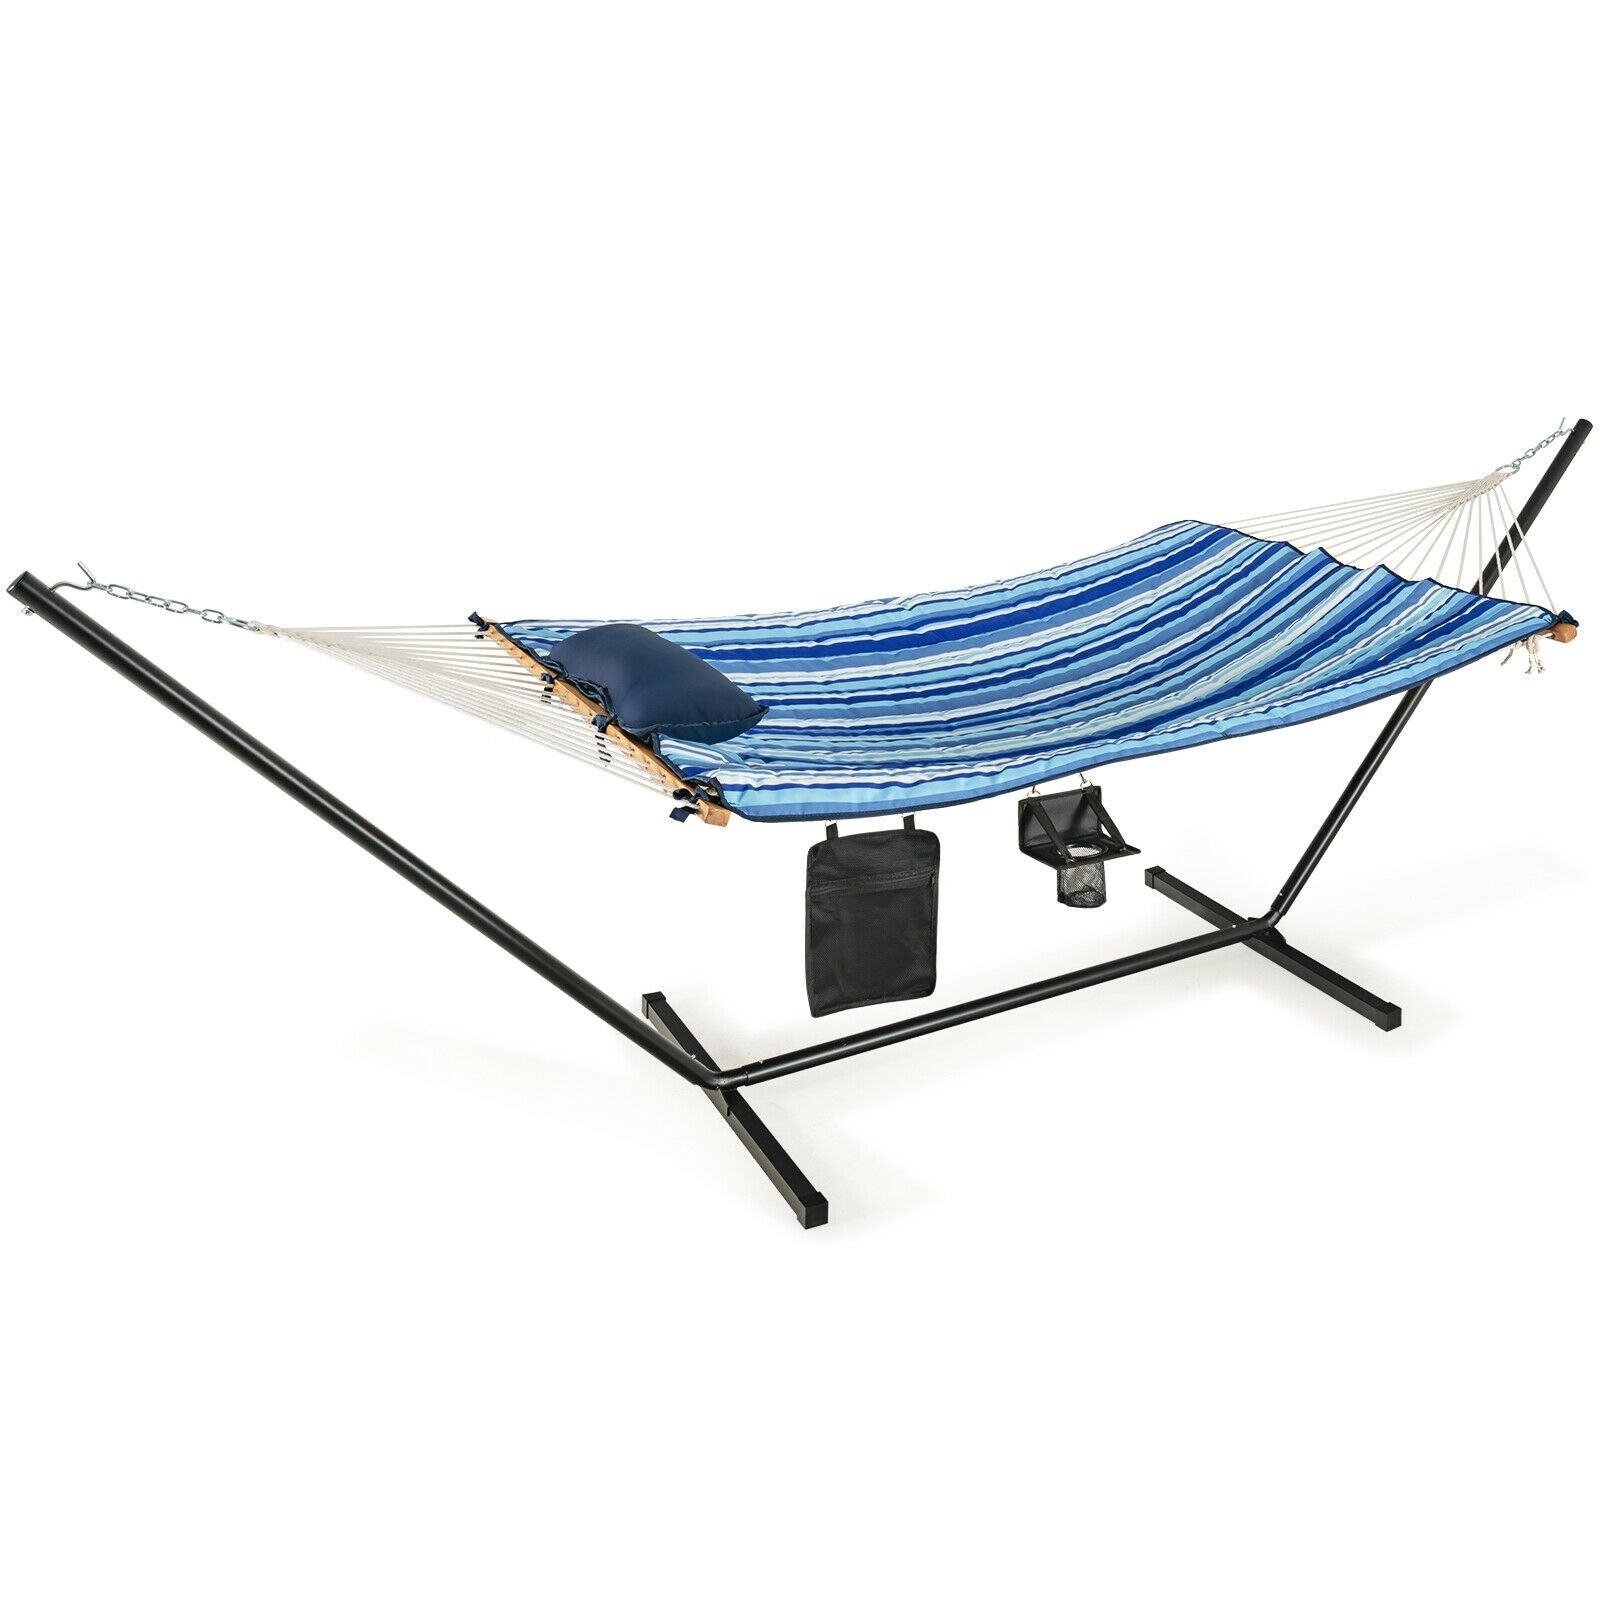 Hammock Chair Stand Set Cotton Swing with Pillow Cup Holder Indoor Outdoor - 140 inch x36.5 inch x 48 inch (L x W x H)